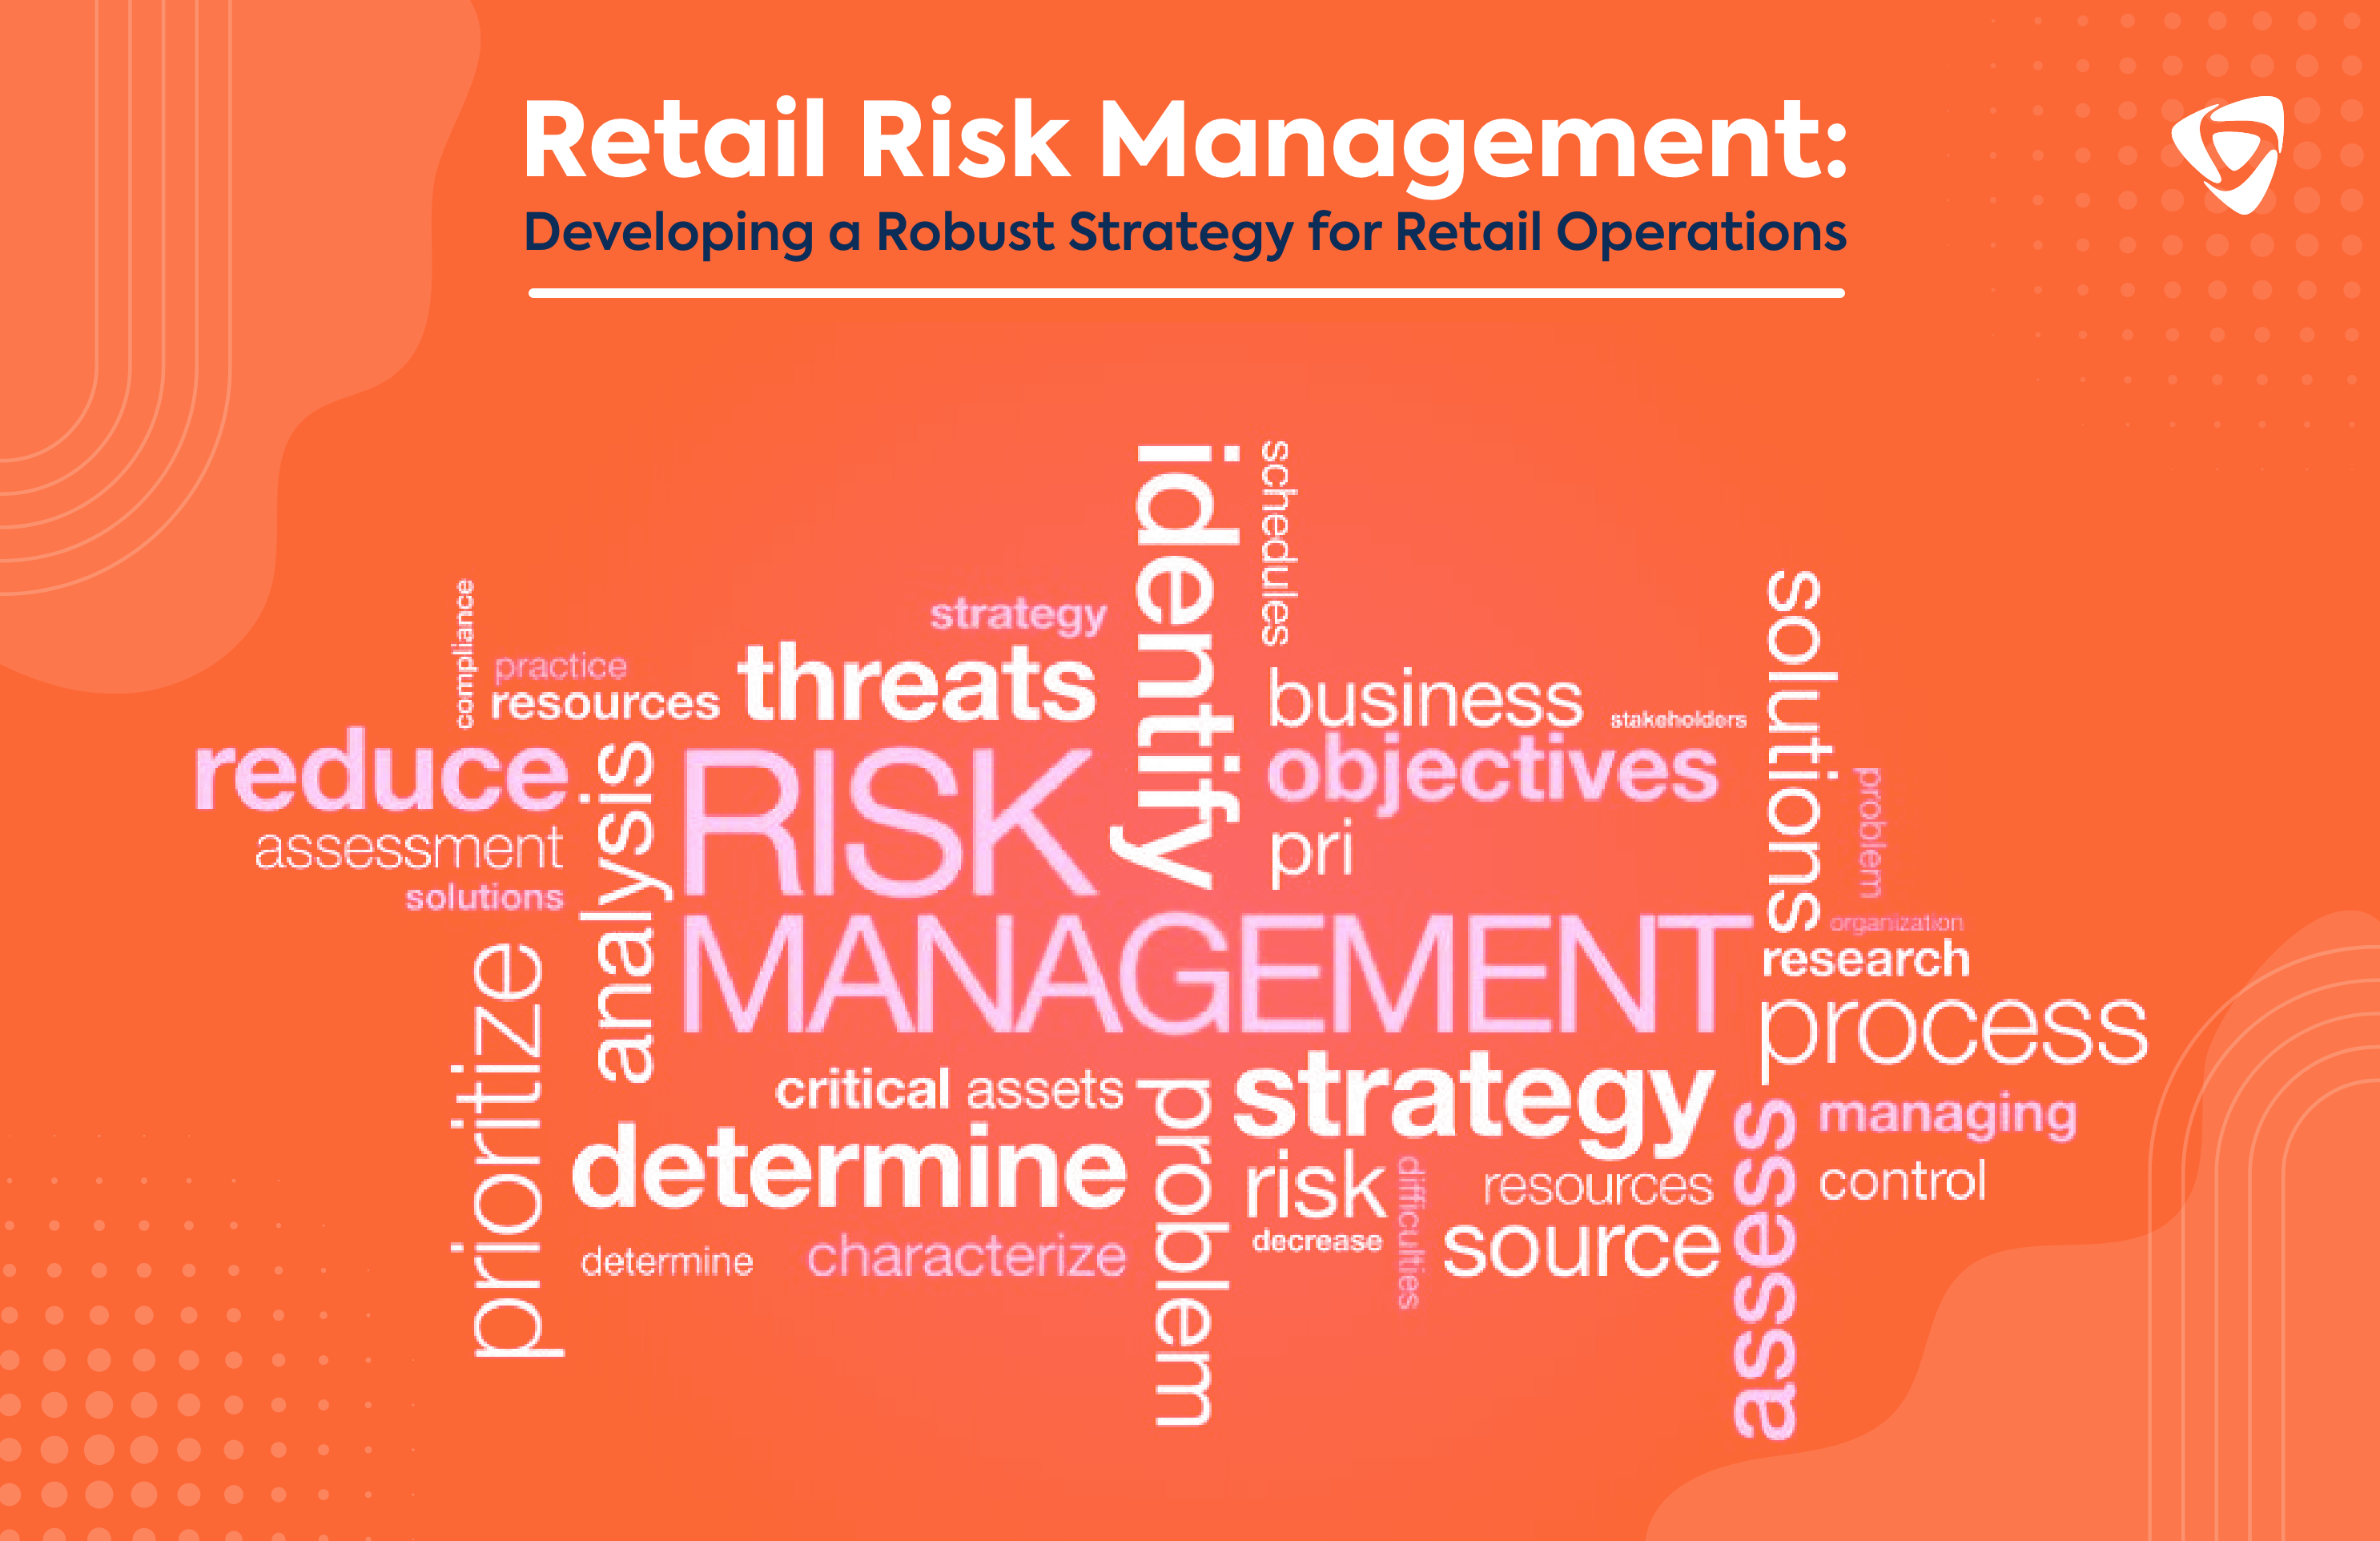 Retail Risk Management: Developing a Robust Strategy for Retail Operations